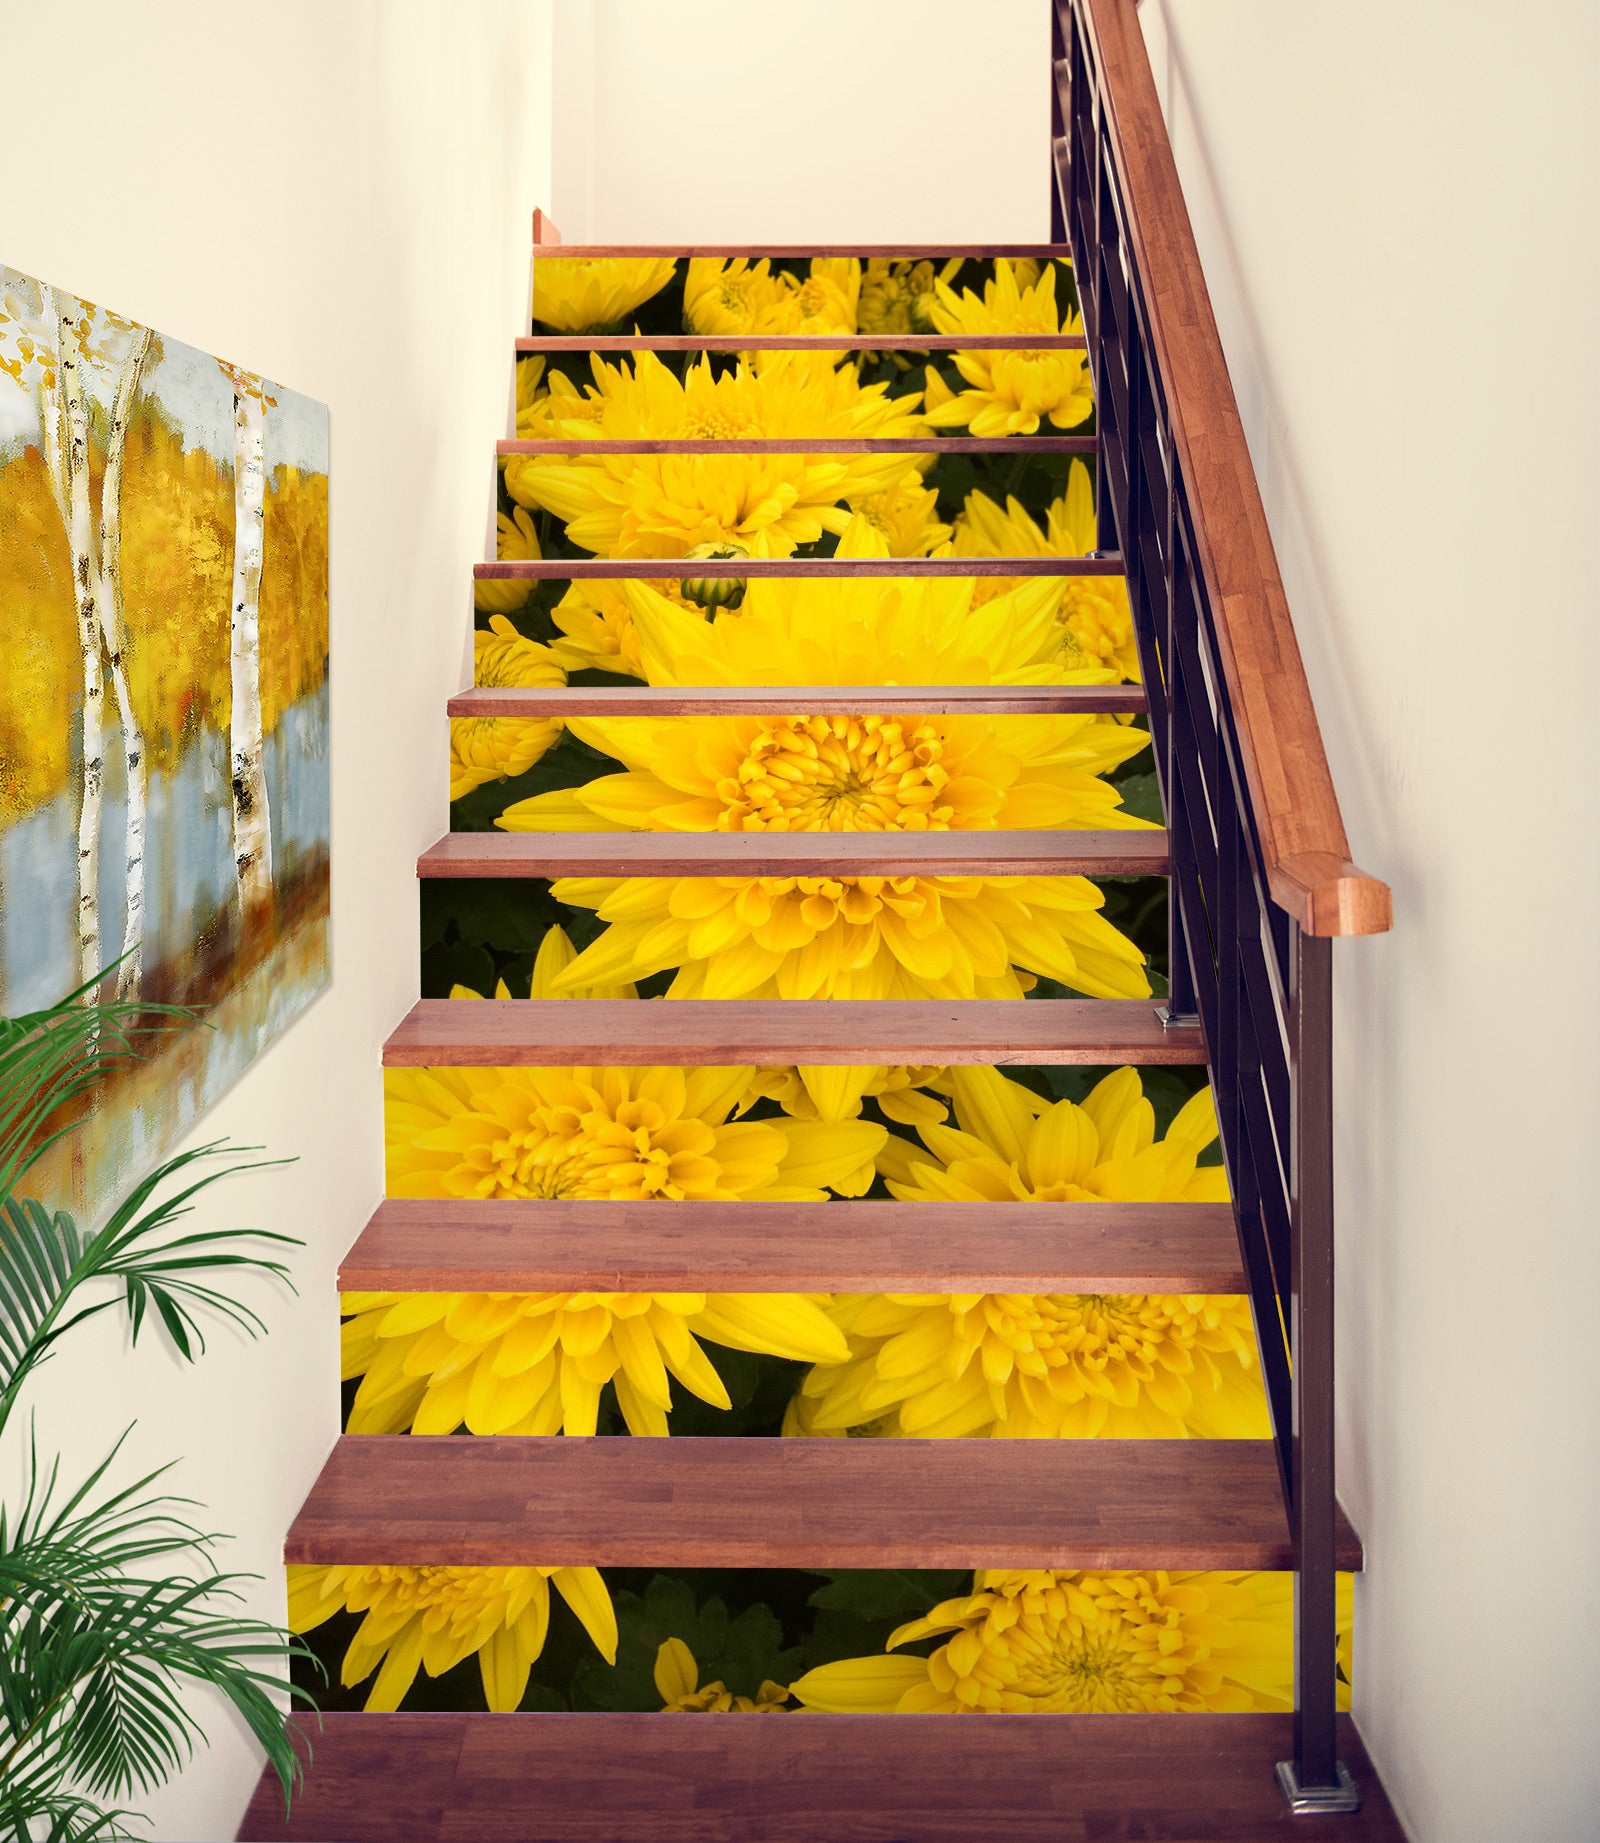 3D Showy Yellow Flowers 530 Stair Risers